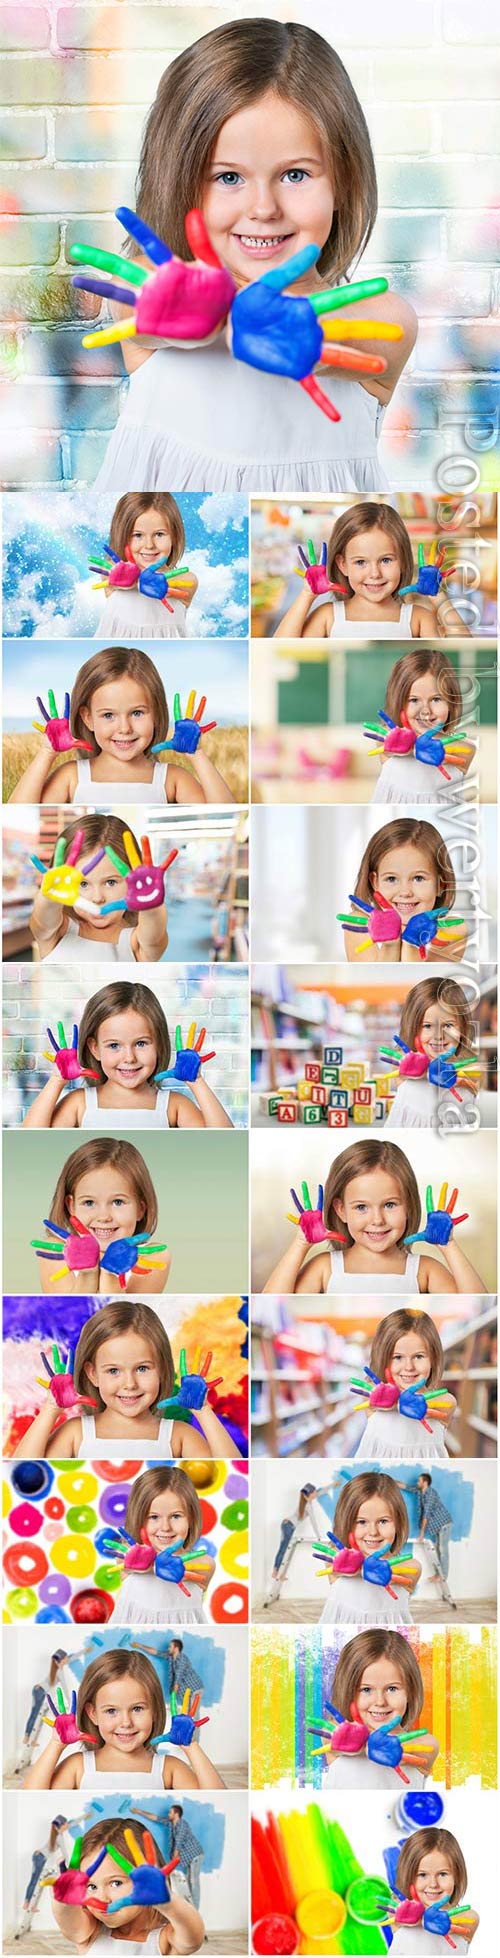 Little baby pens in paint stock photo